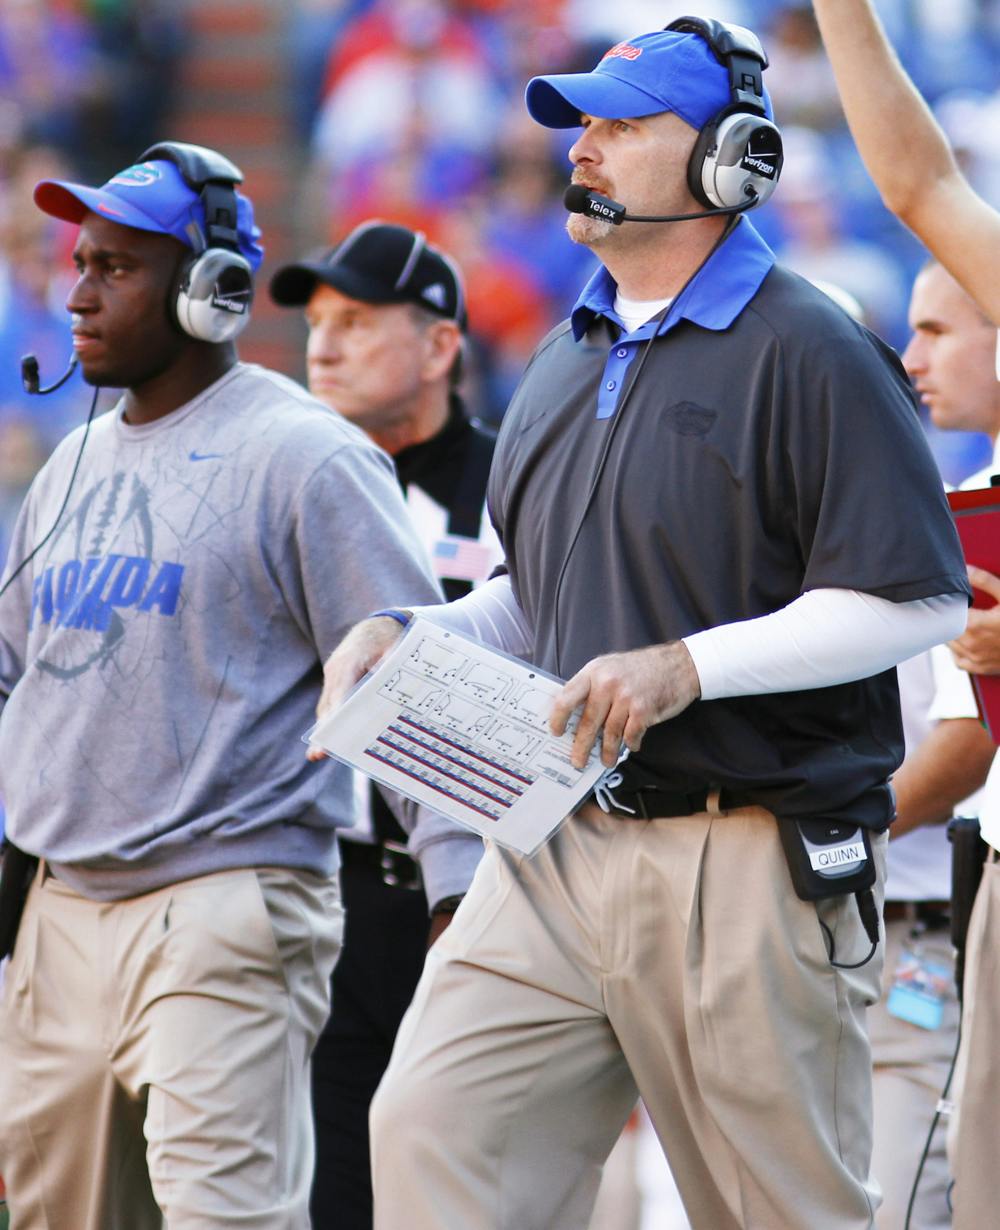 <p><span>Former UF defensive coordinator Dan Quinn calls a play during Florida’s 27-20 victory against Louisiana on Nov. 10 at Ben Hill Griffin Stadium. </span></p>
<div><span><br /></span></div>